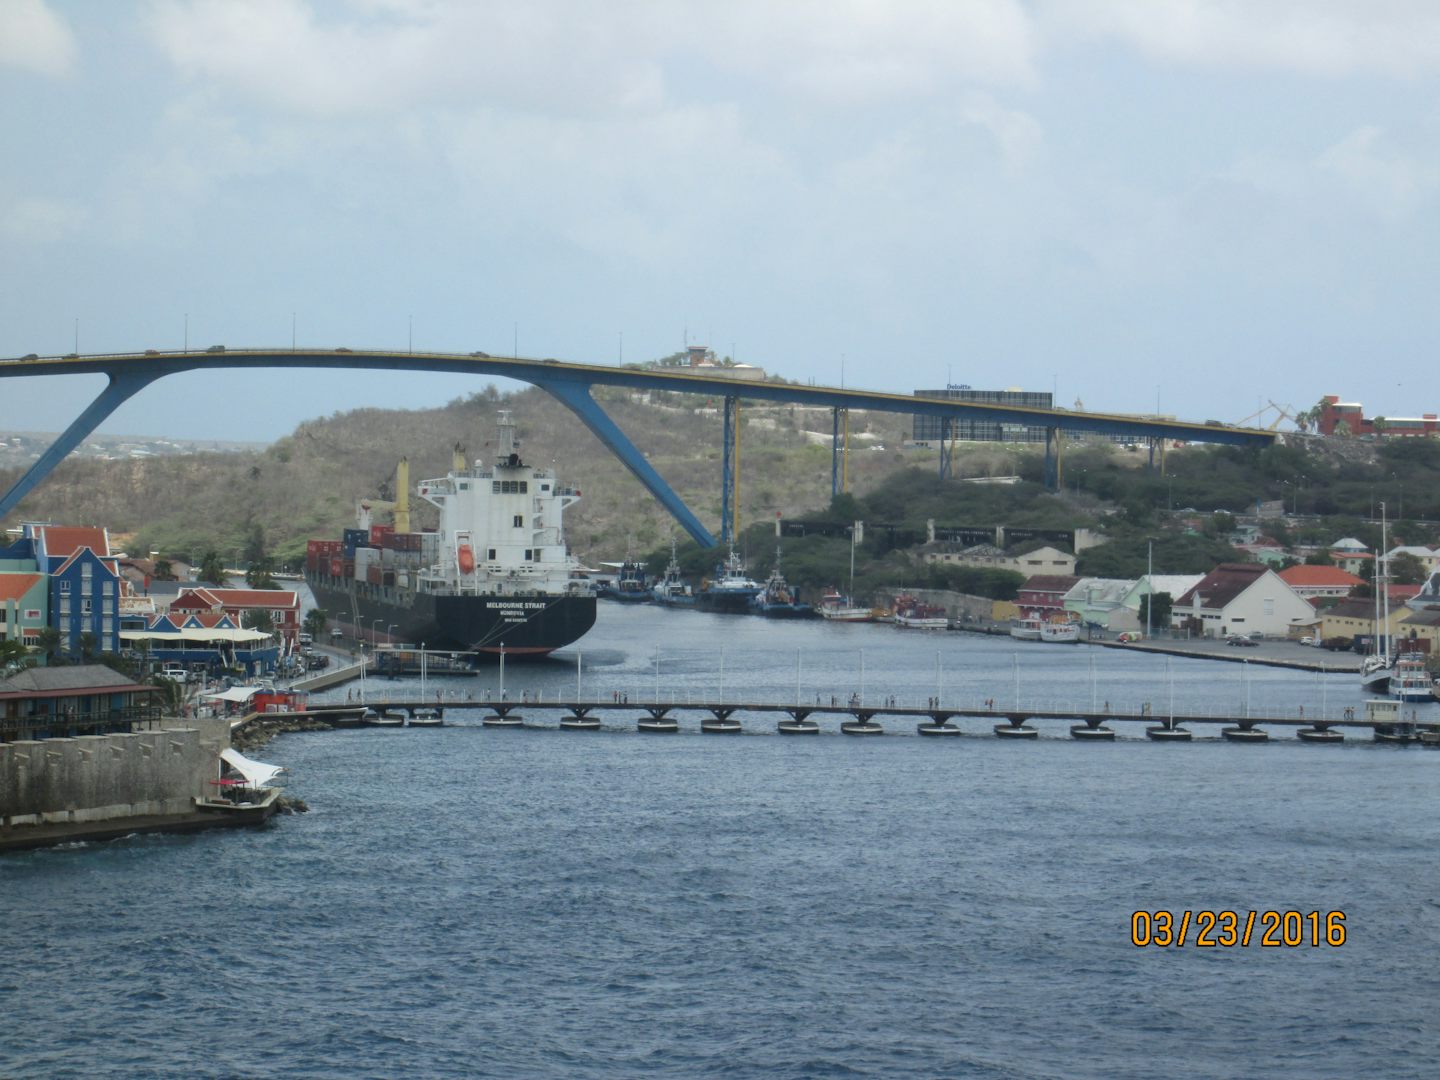 Docked in Curacao